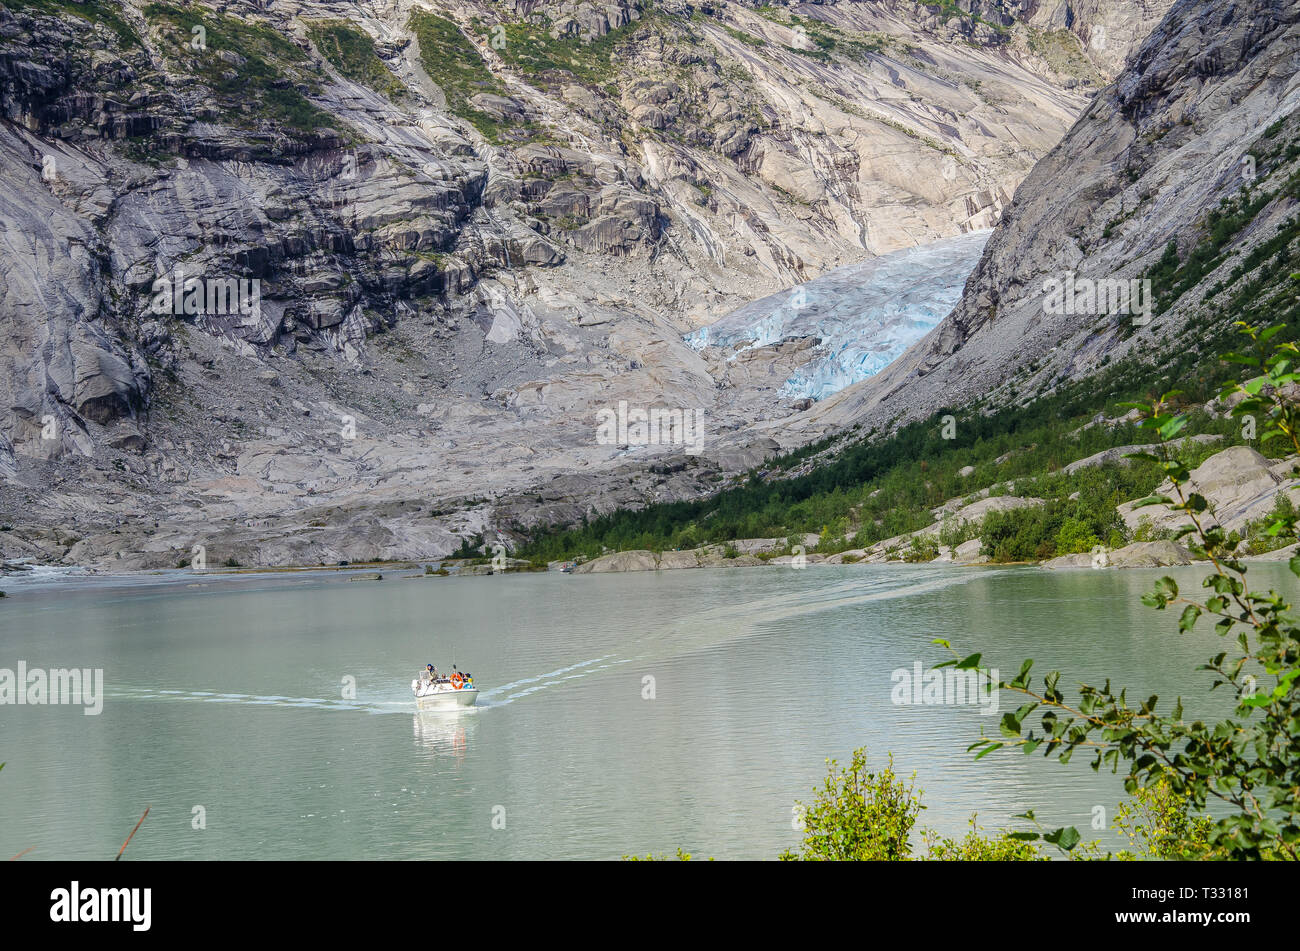 Distance view of the Nigardsbreen glacier with boat on the lake in the foreground. Stock Photo